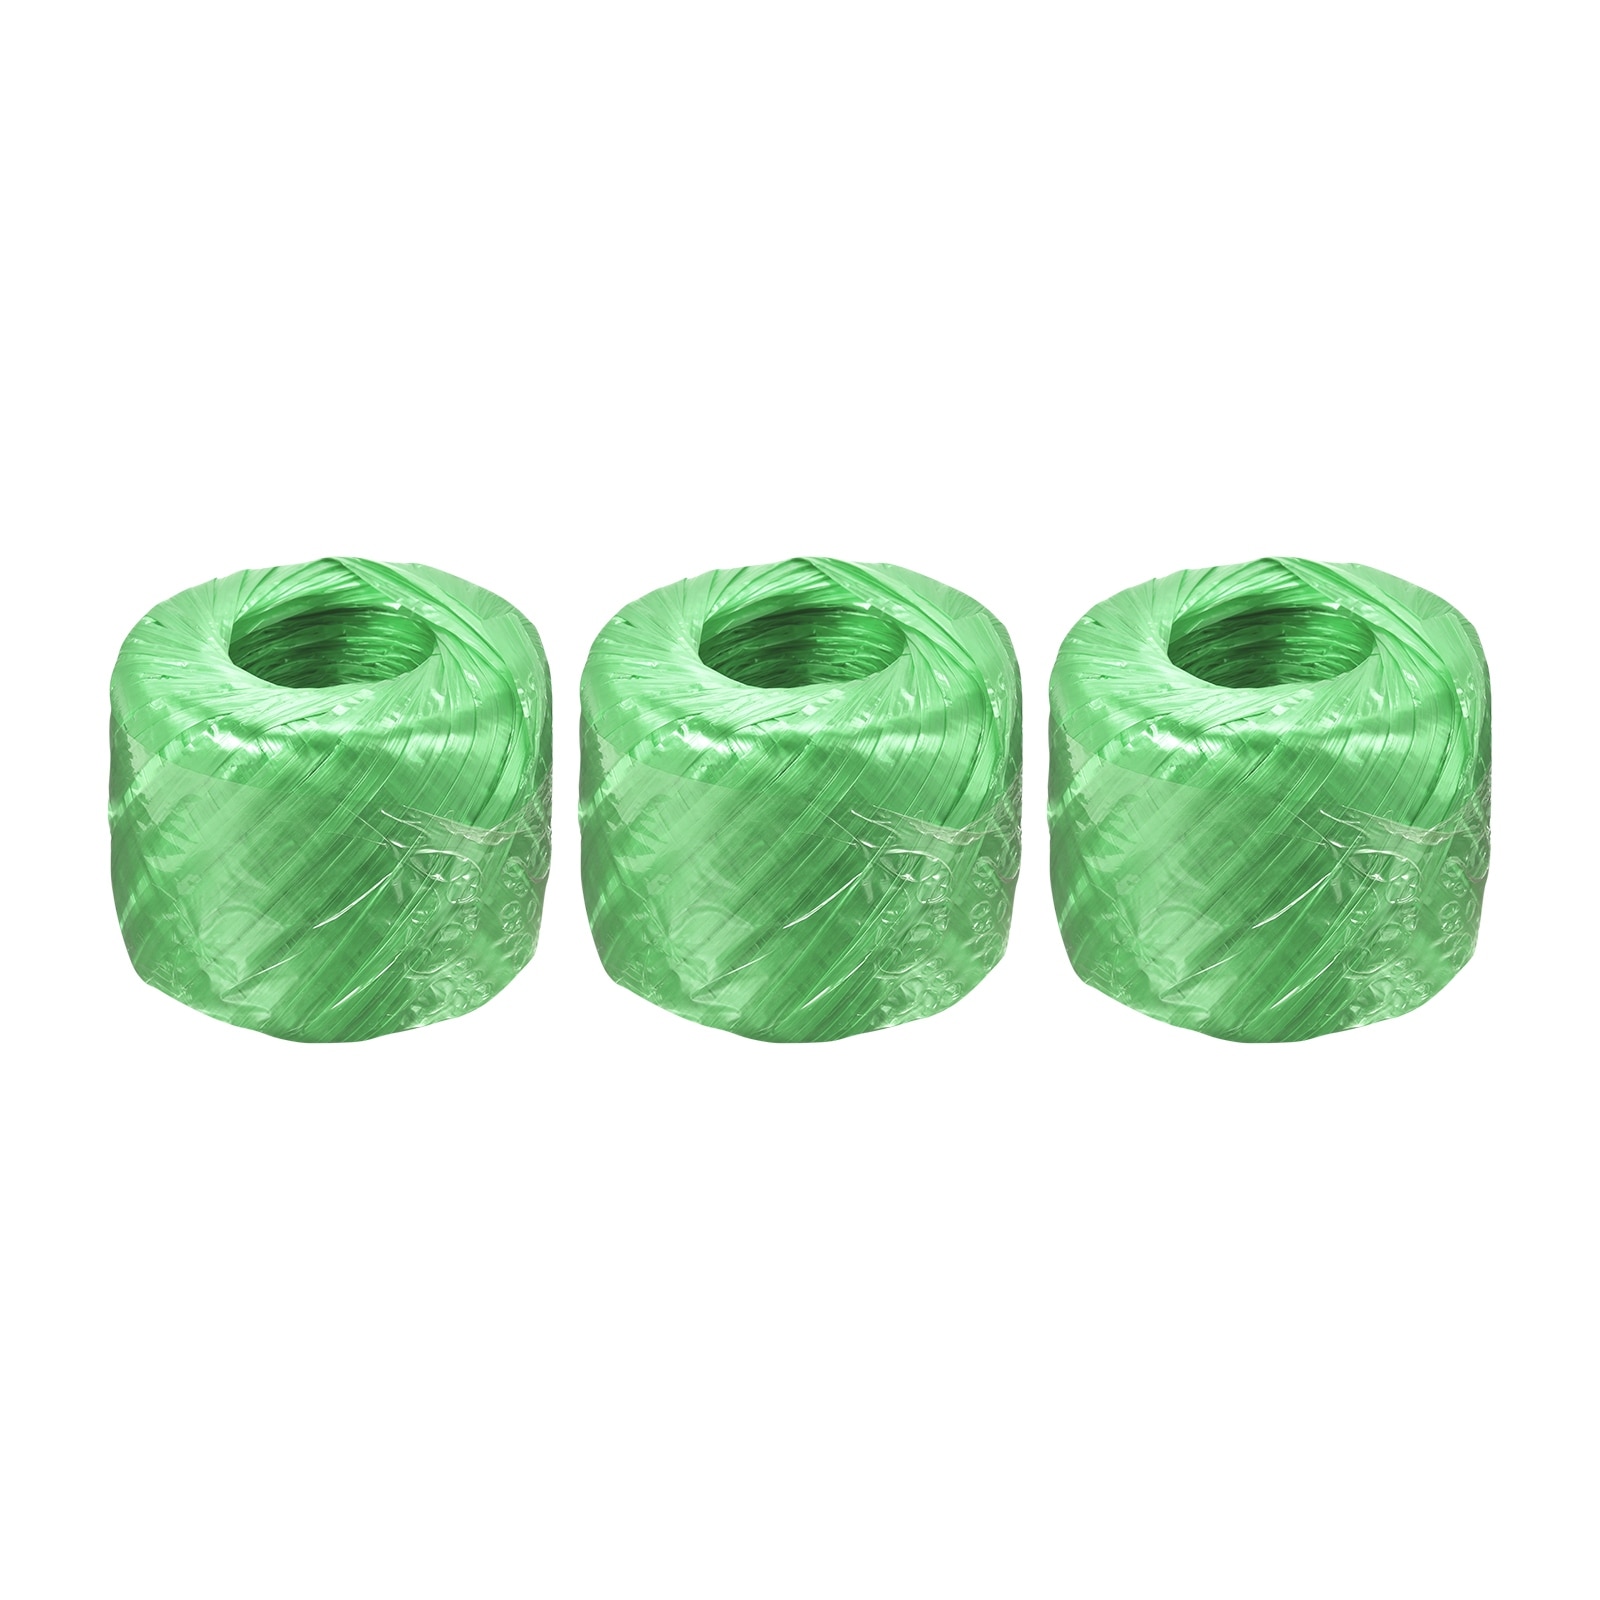 Polyester Nylon Plastic Rope Twine Bundled for Packing ,100m Green